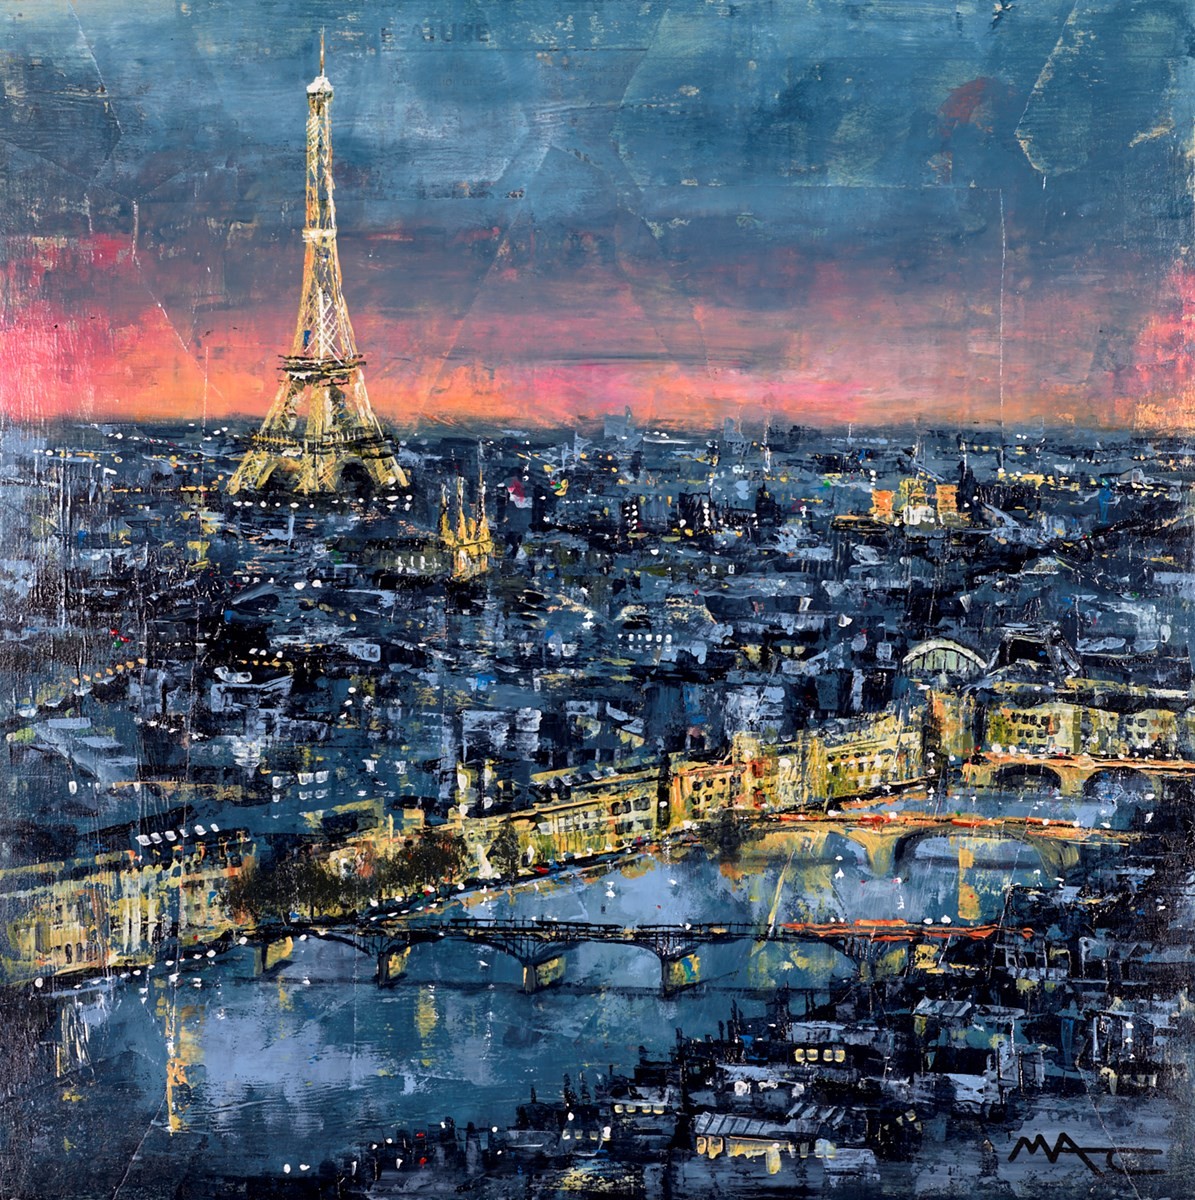 Continental Sunset. A painting by Mark Curryer of a view across Paris at sunset